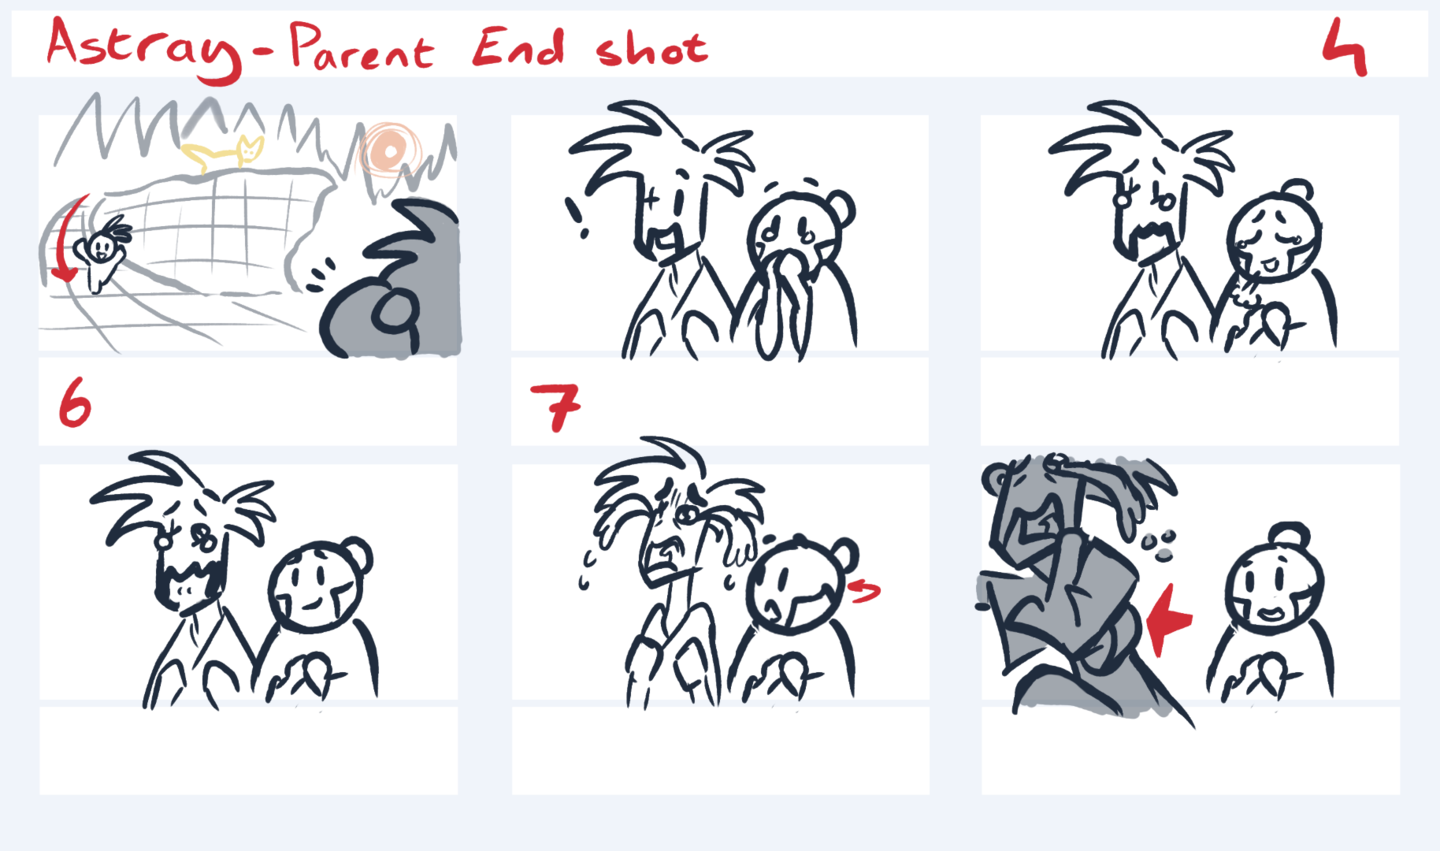 Storyboard of the worried dads of the missing boy find their son and are overwhelmed with emotion and running to him.